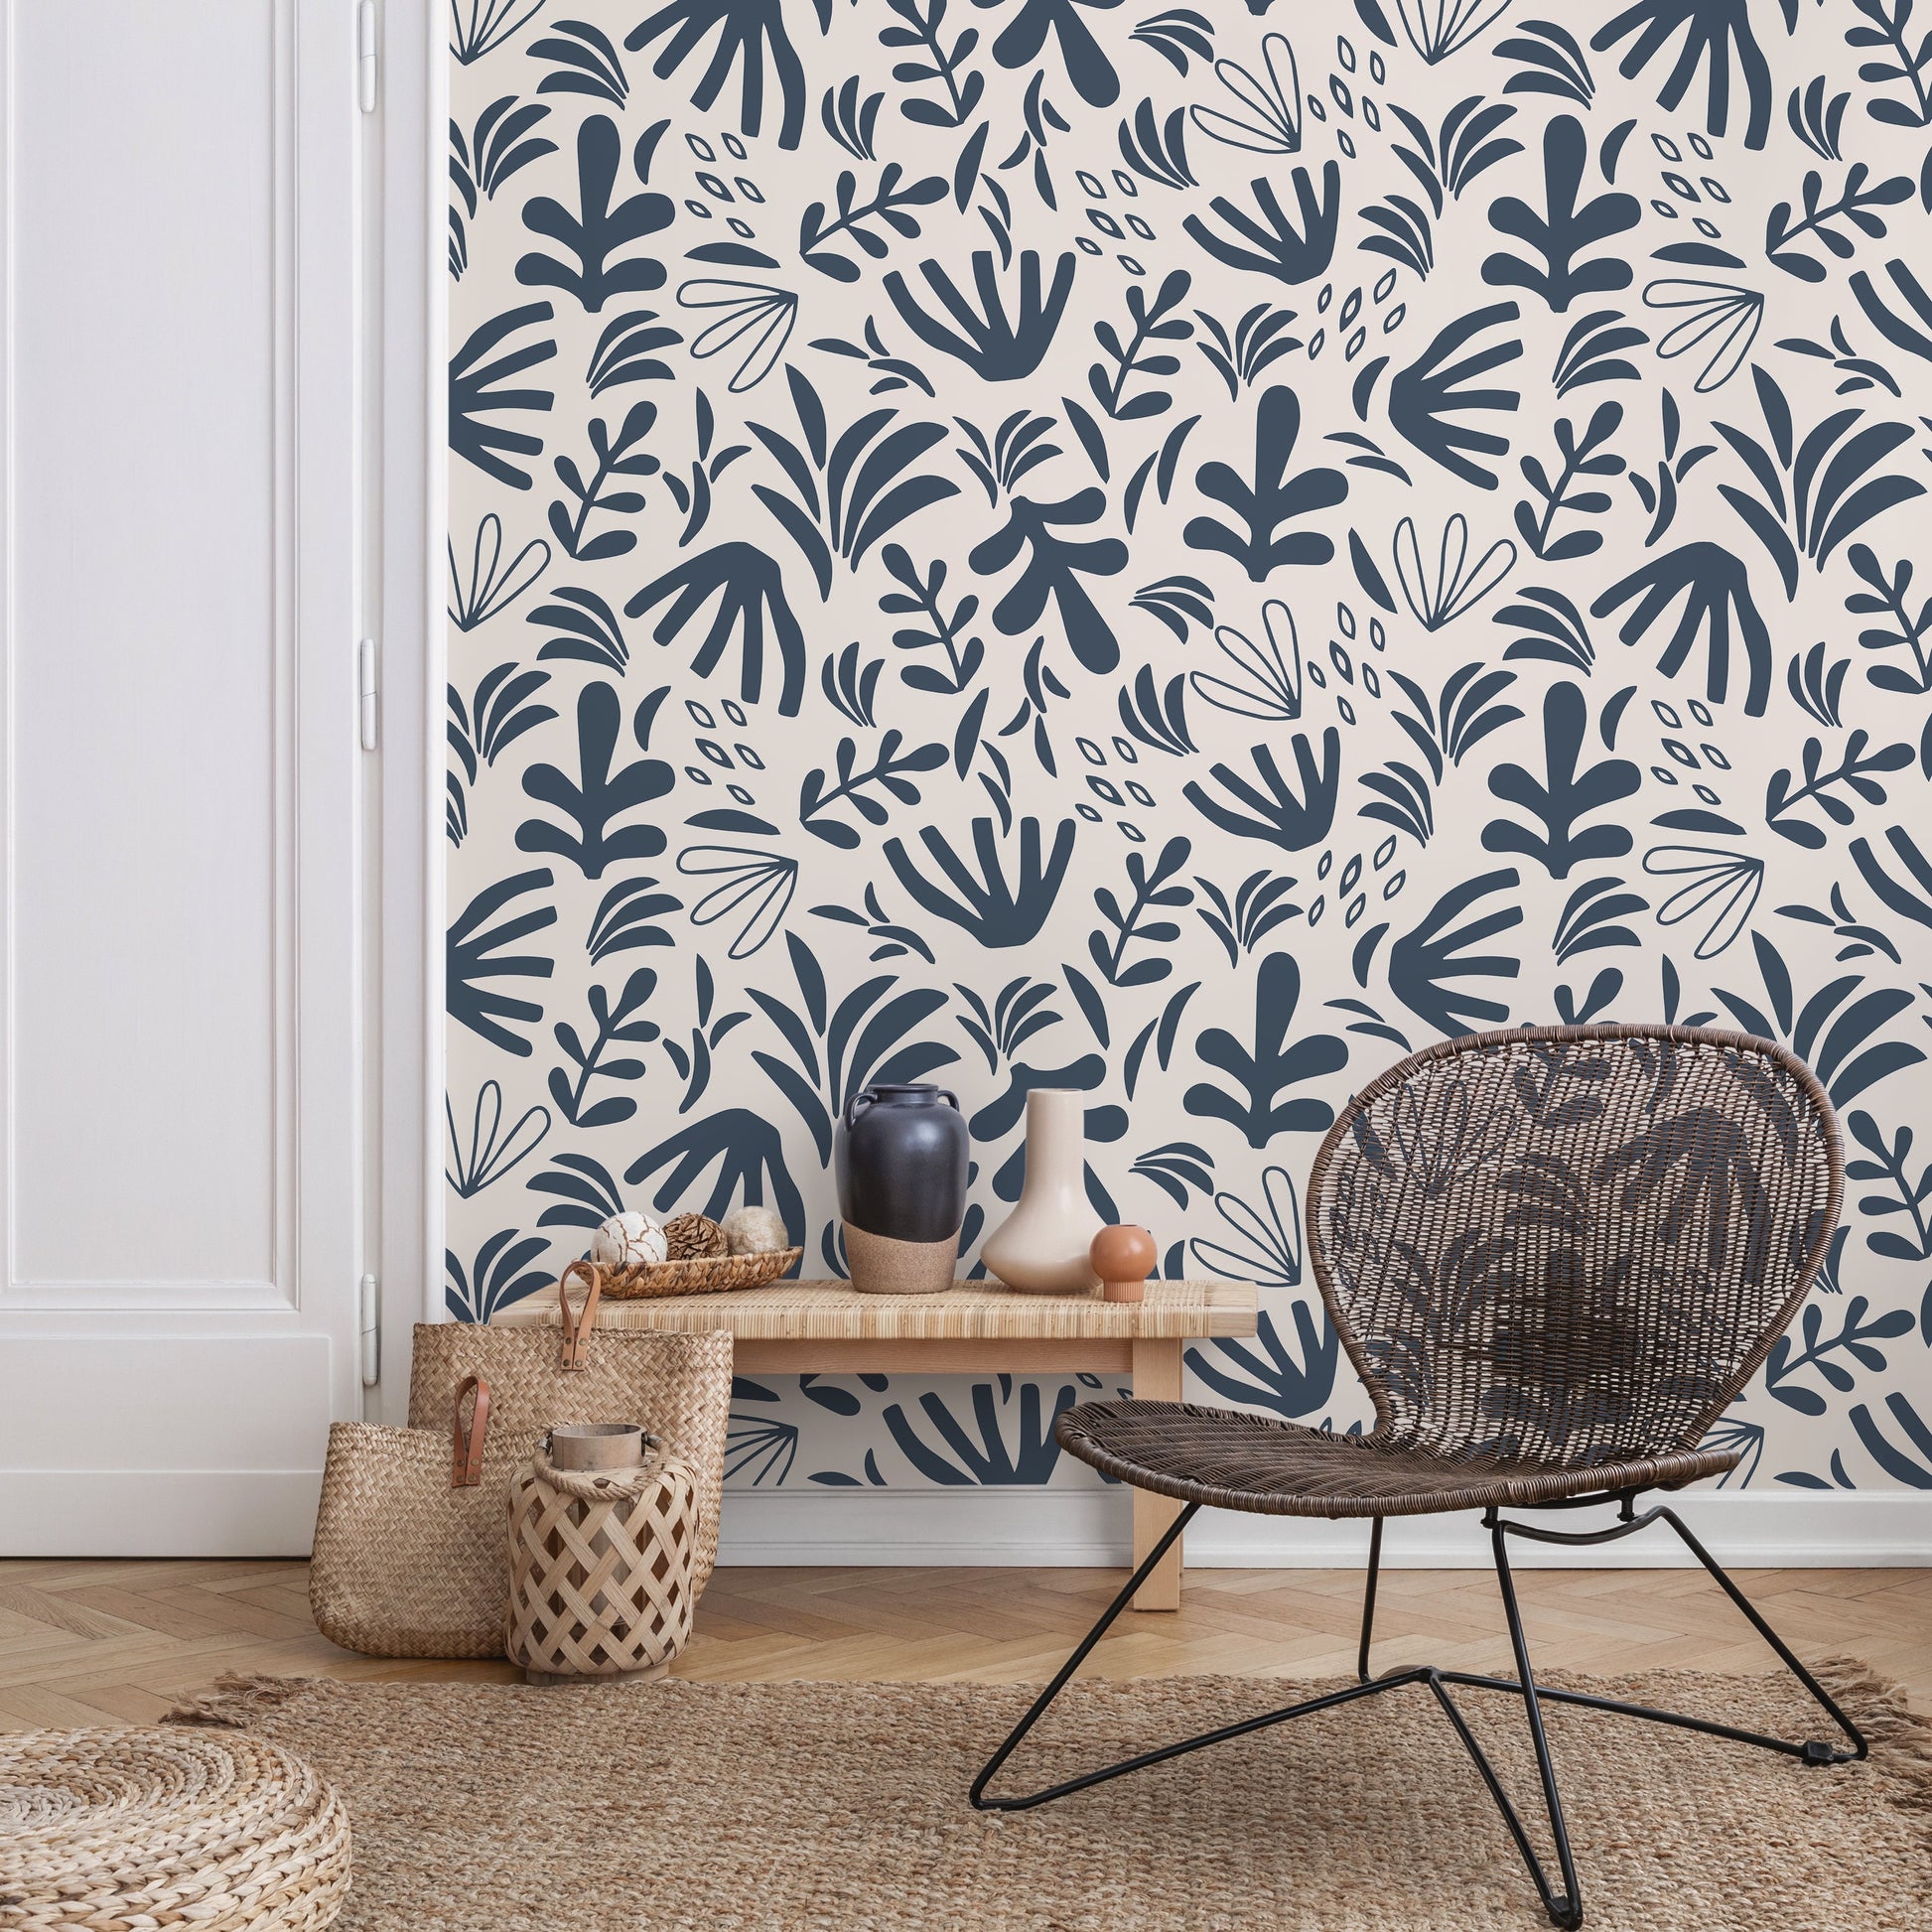 Abstract Garden Wallpaper Boho Wallpaper Peel and Stick and Traditional Wallpaper - D679